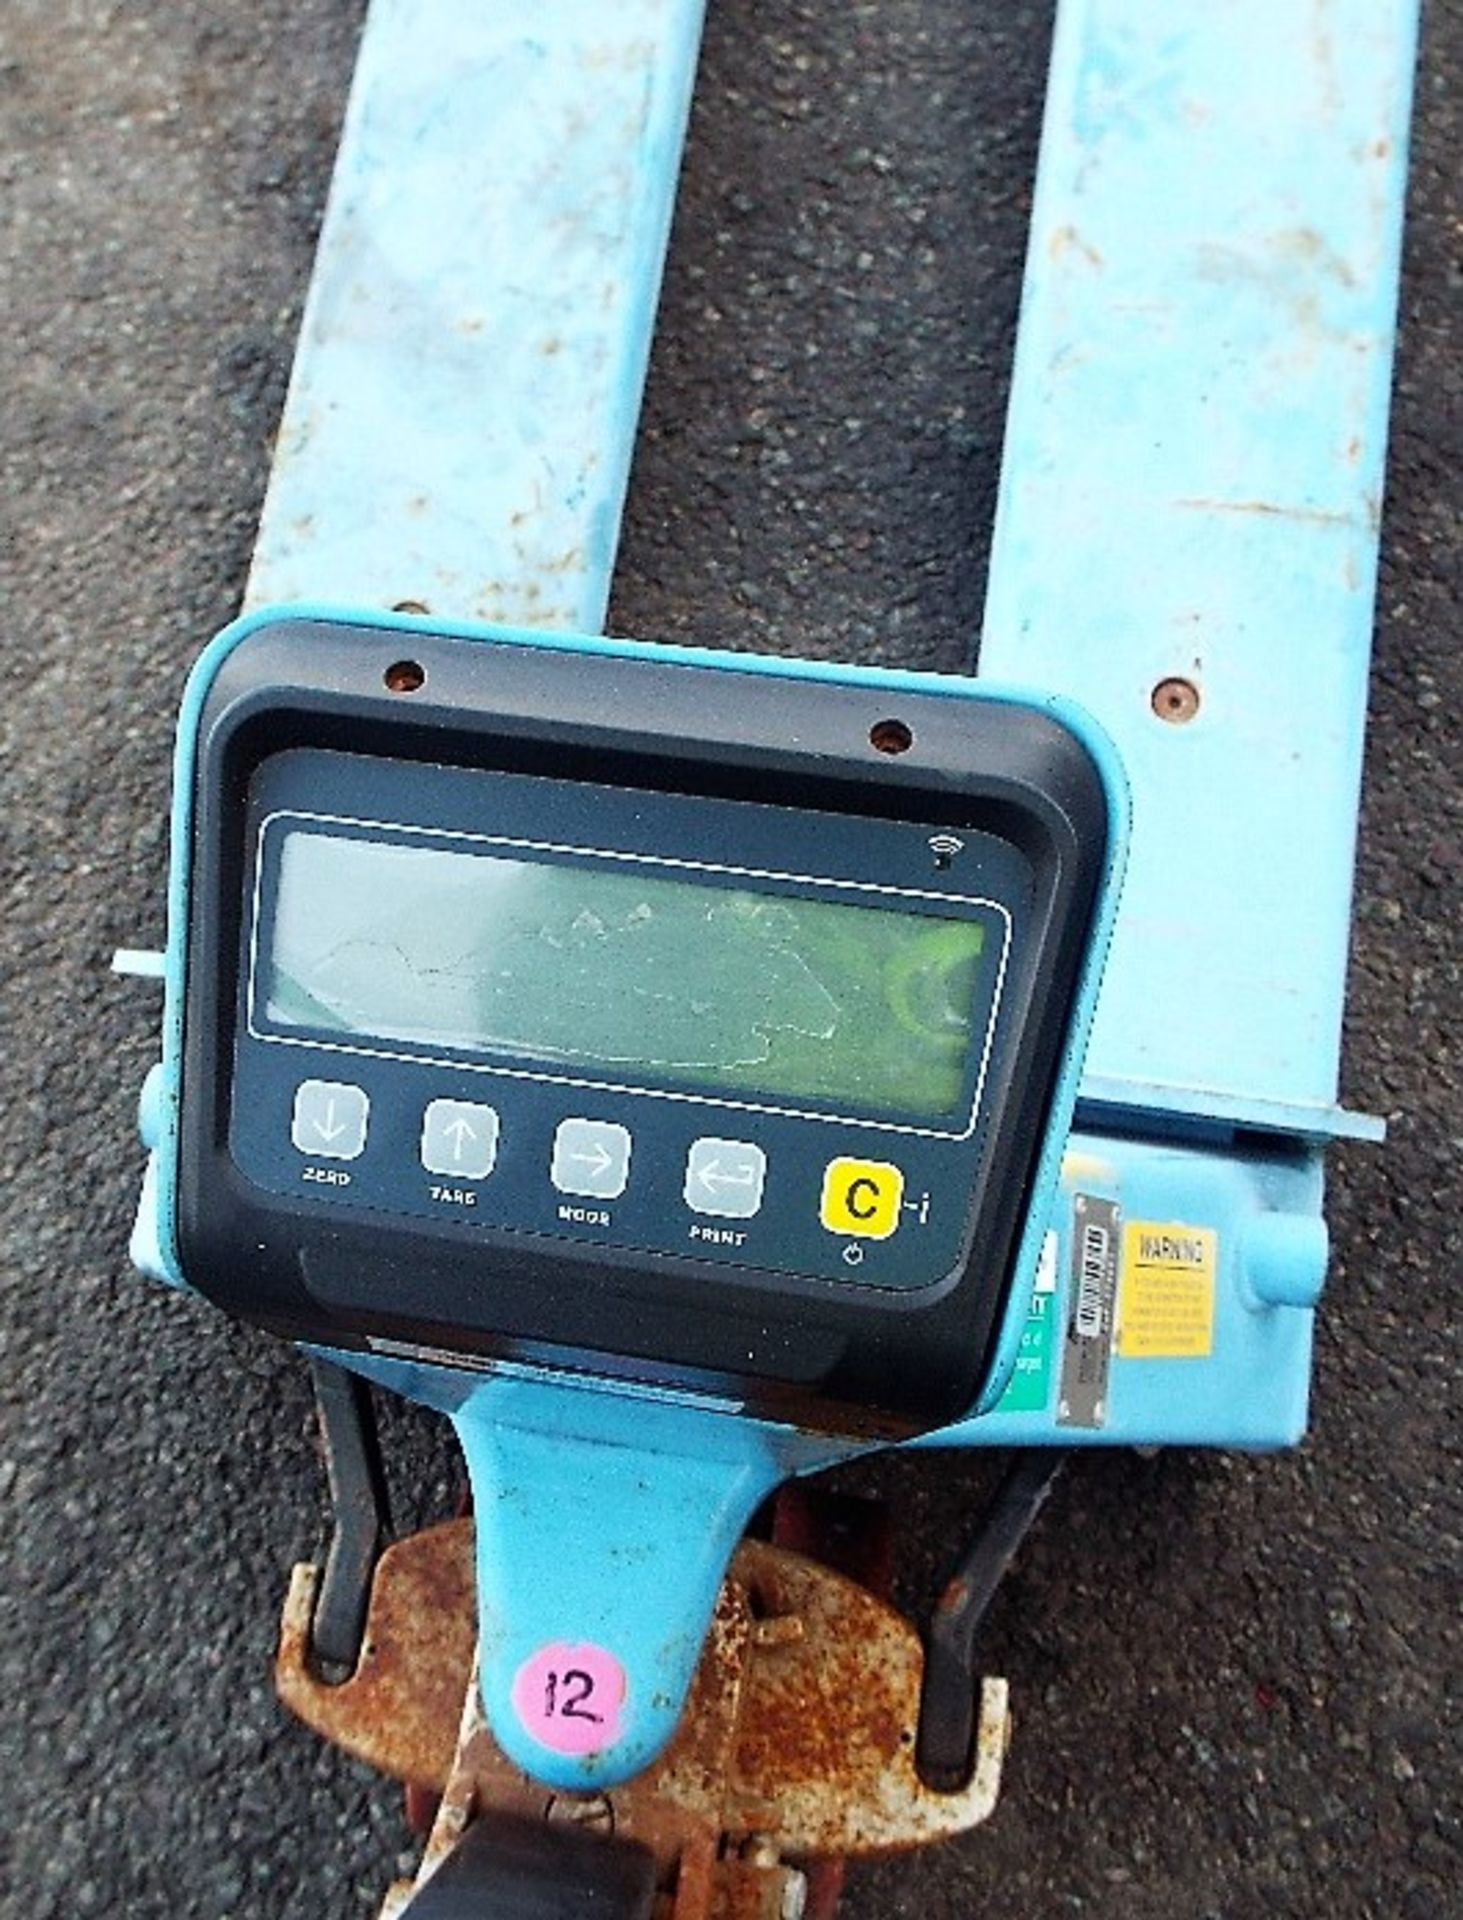 Pallet Truck With Integrated Weighing Scales. - Image 2 of 4